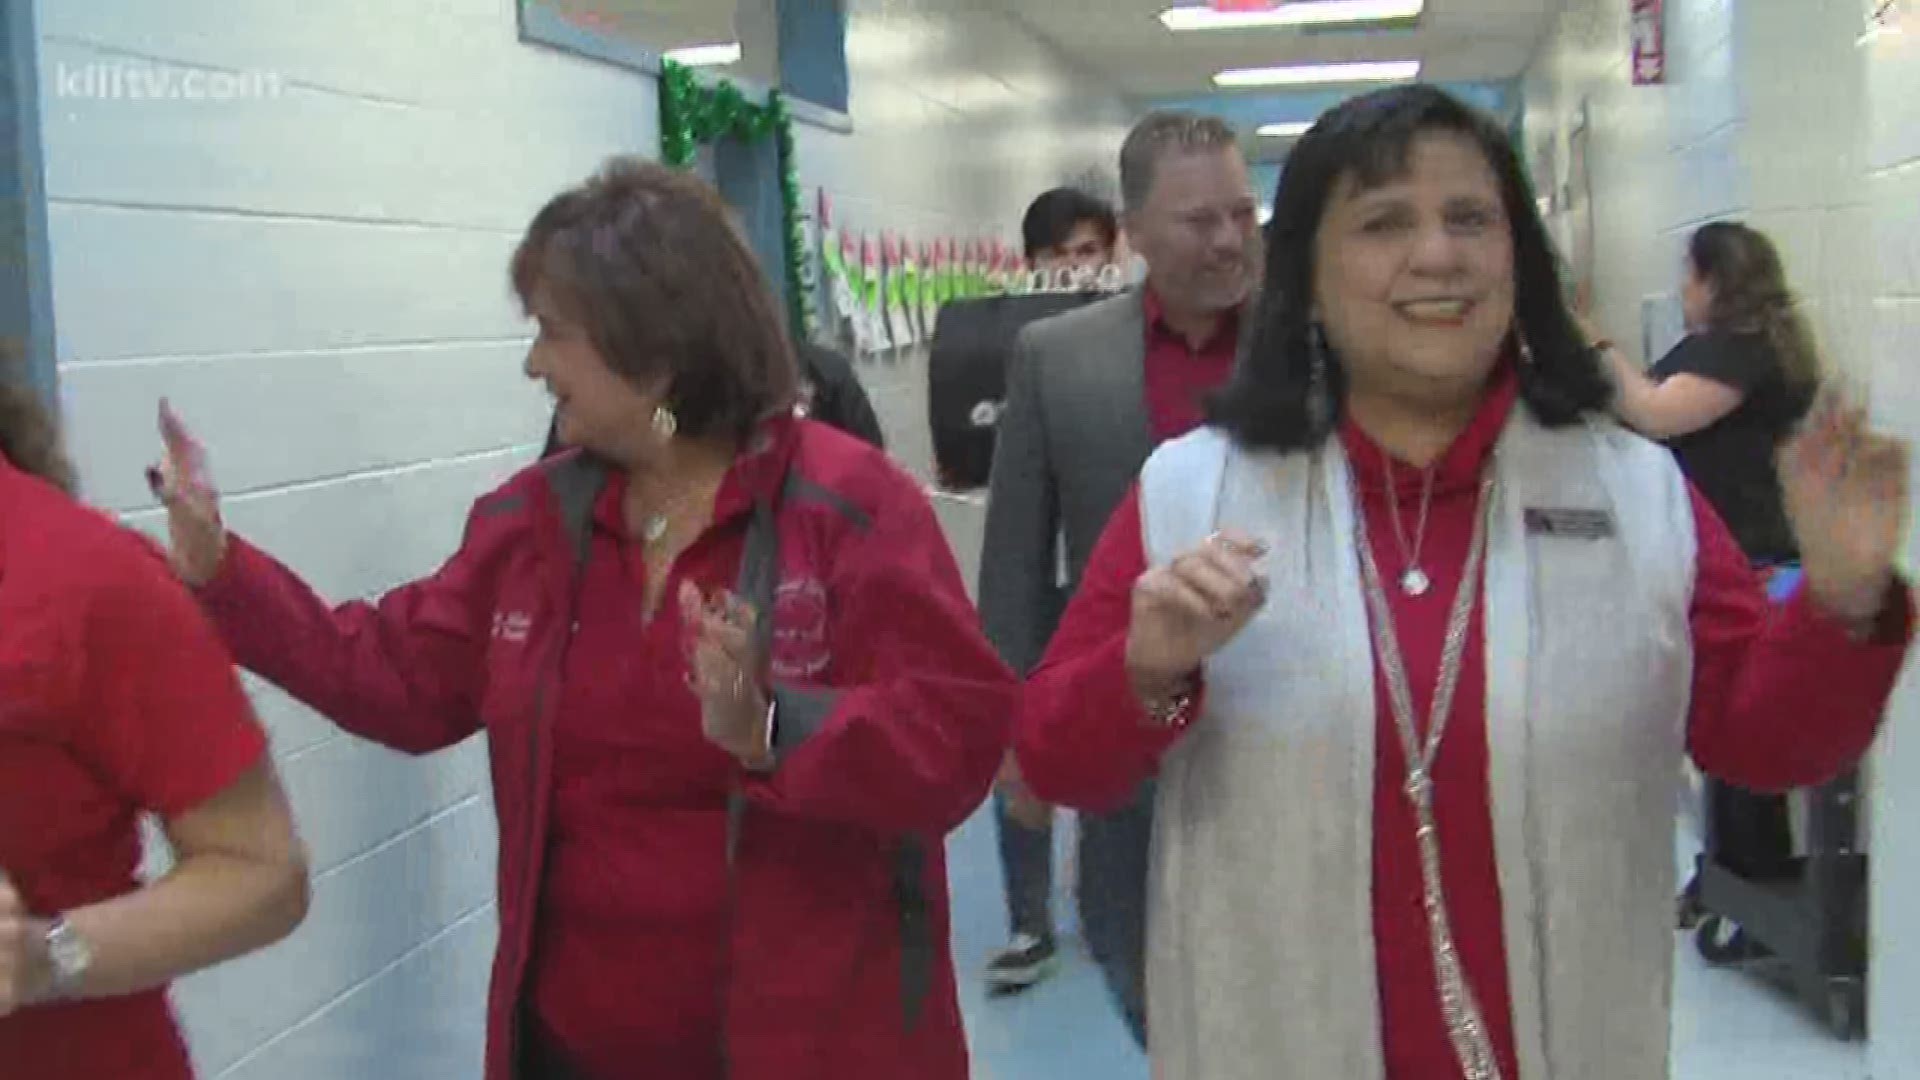 Christmas came early for 10 teachers in the Robstown Independent School District.